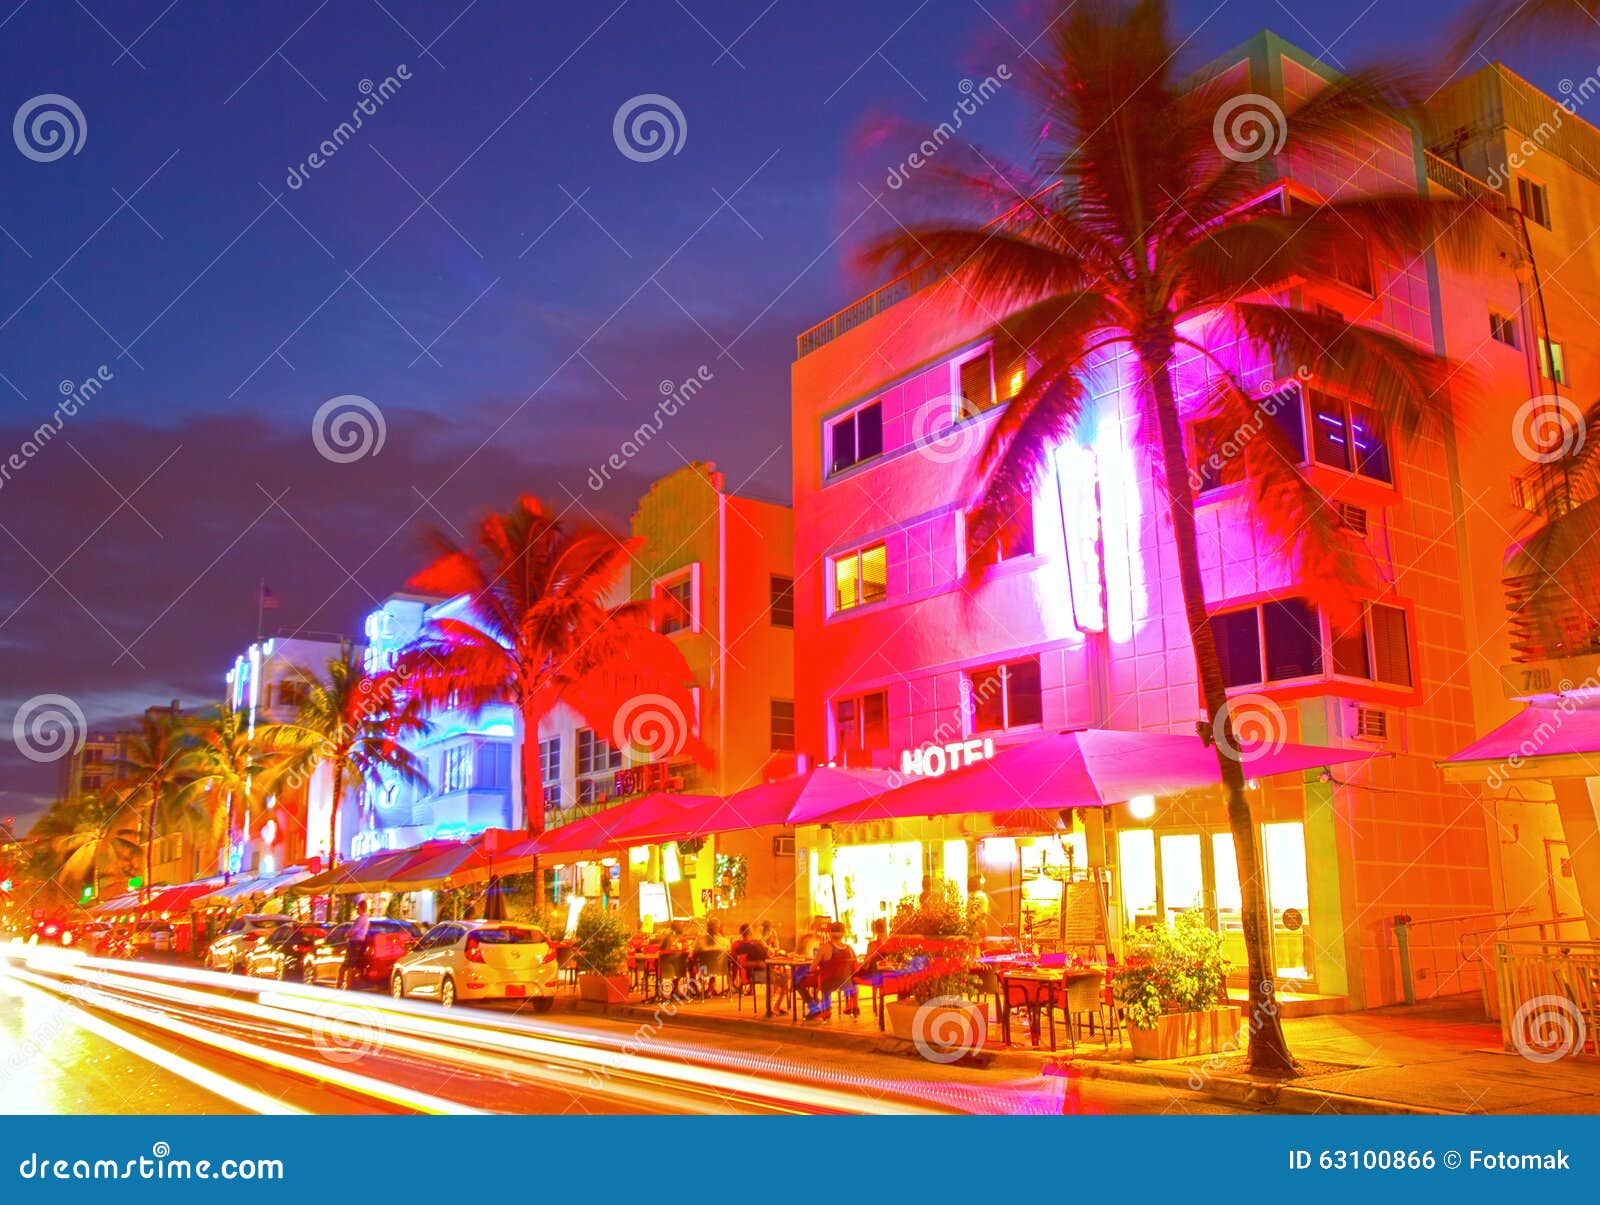 miami beach, florida moving traffic hotels and restaurants at sunset on ocean drive